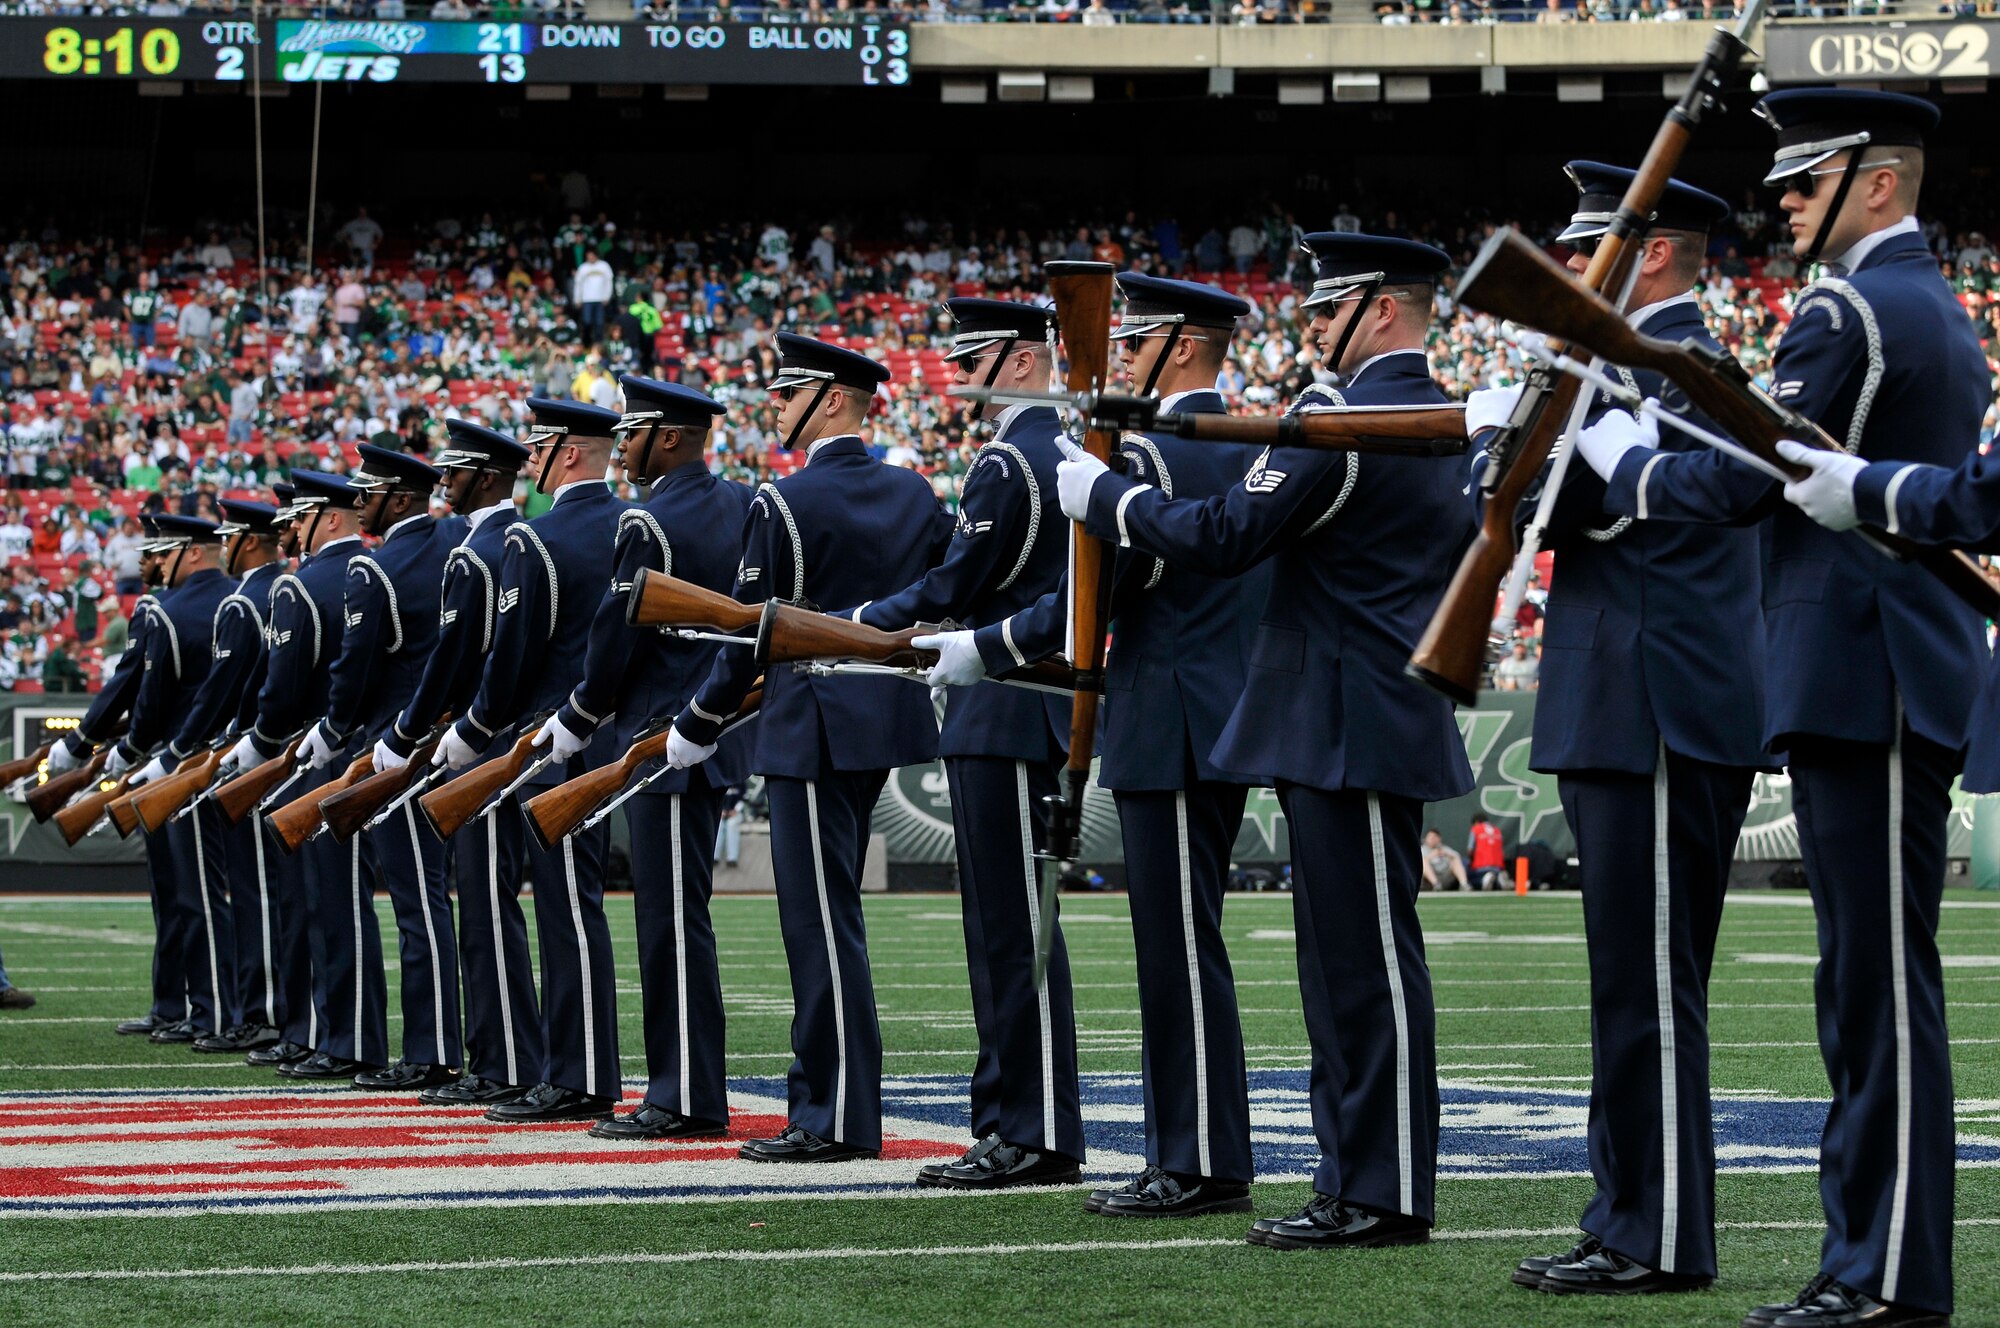 United States Air Force Honor Guard Drill Team members perform their line formation during the halftime show at a New York Jets football game against the Jacksonville Jaguars at Giants Stadium Nov. 15, in East Rutherford, New Jersey. The Drill Team tours worldwide to showcase the discipline and teamwork of every Air Force Airman. During the Air Force Honor Guard's 60-year history, their traveling component, the Drill Team, has performed in every state of the union and many countries abroad. (U.S. Air Force photo/Senior Airman Marleah Miller)